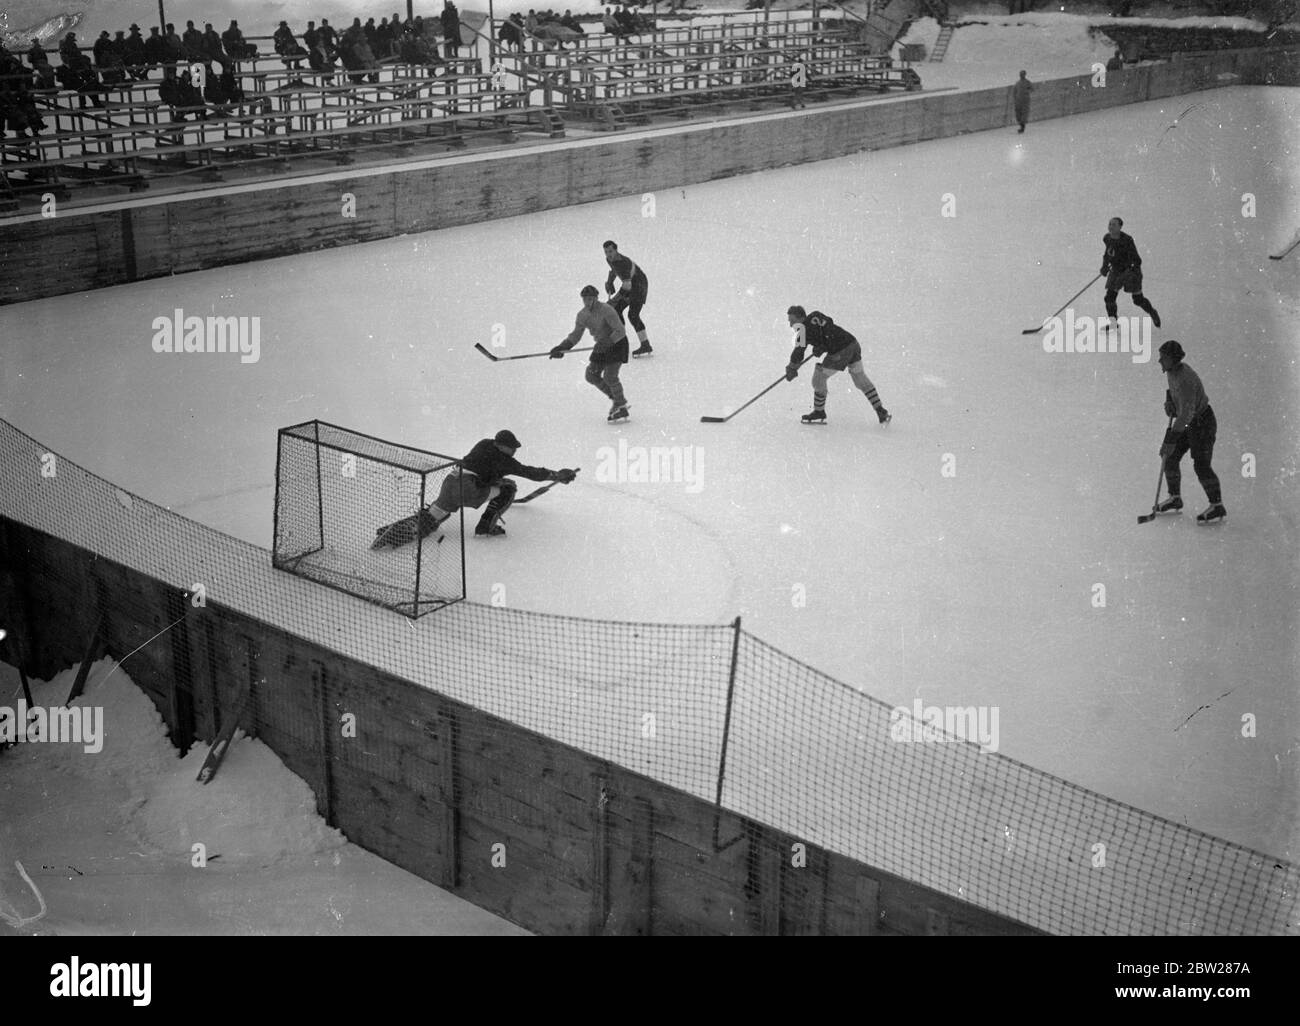 London team beaten in St Moritz ice hockey. A London team was beaten seven goals to nil by St Moritz team in the contest at the annual St Moritz trophy at the Swiss resort. Photo shows, play round one of the goals dreamy ice hockey match at St Moritz. 1 January 1938 Stock Photo